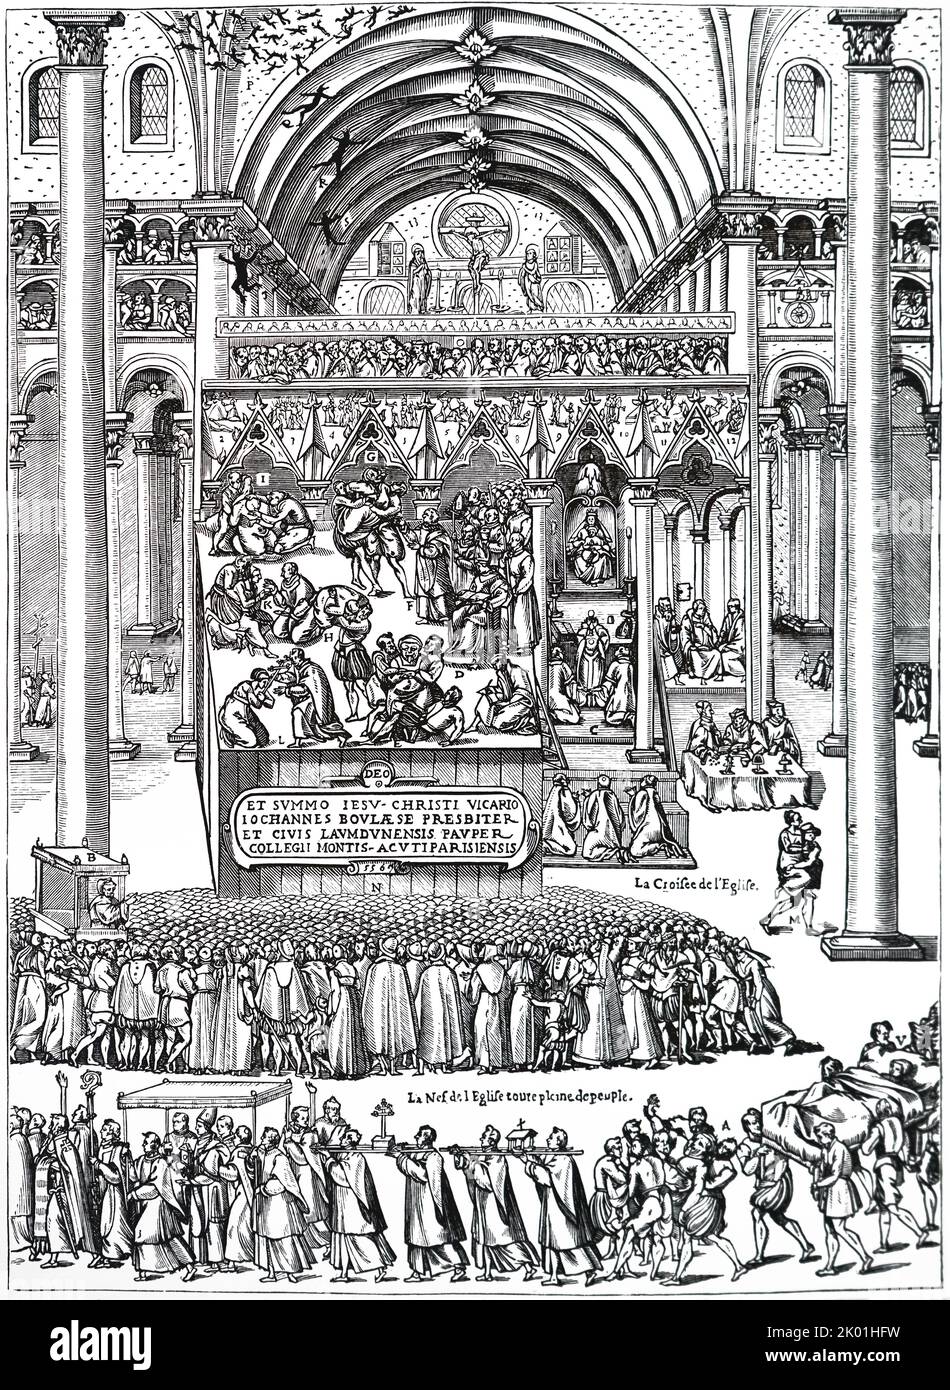 The exorcism of Nicole Aubry, Notre-Dame de Laon, 1556. Nicole was supposedly possessed of 29 demons, to be seen as black specks flying near the roof or the cathedral. The exorcism took nine days, creating much public interest in the process. Copy of print published in 1575. Stock Photo